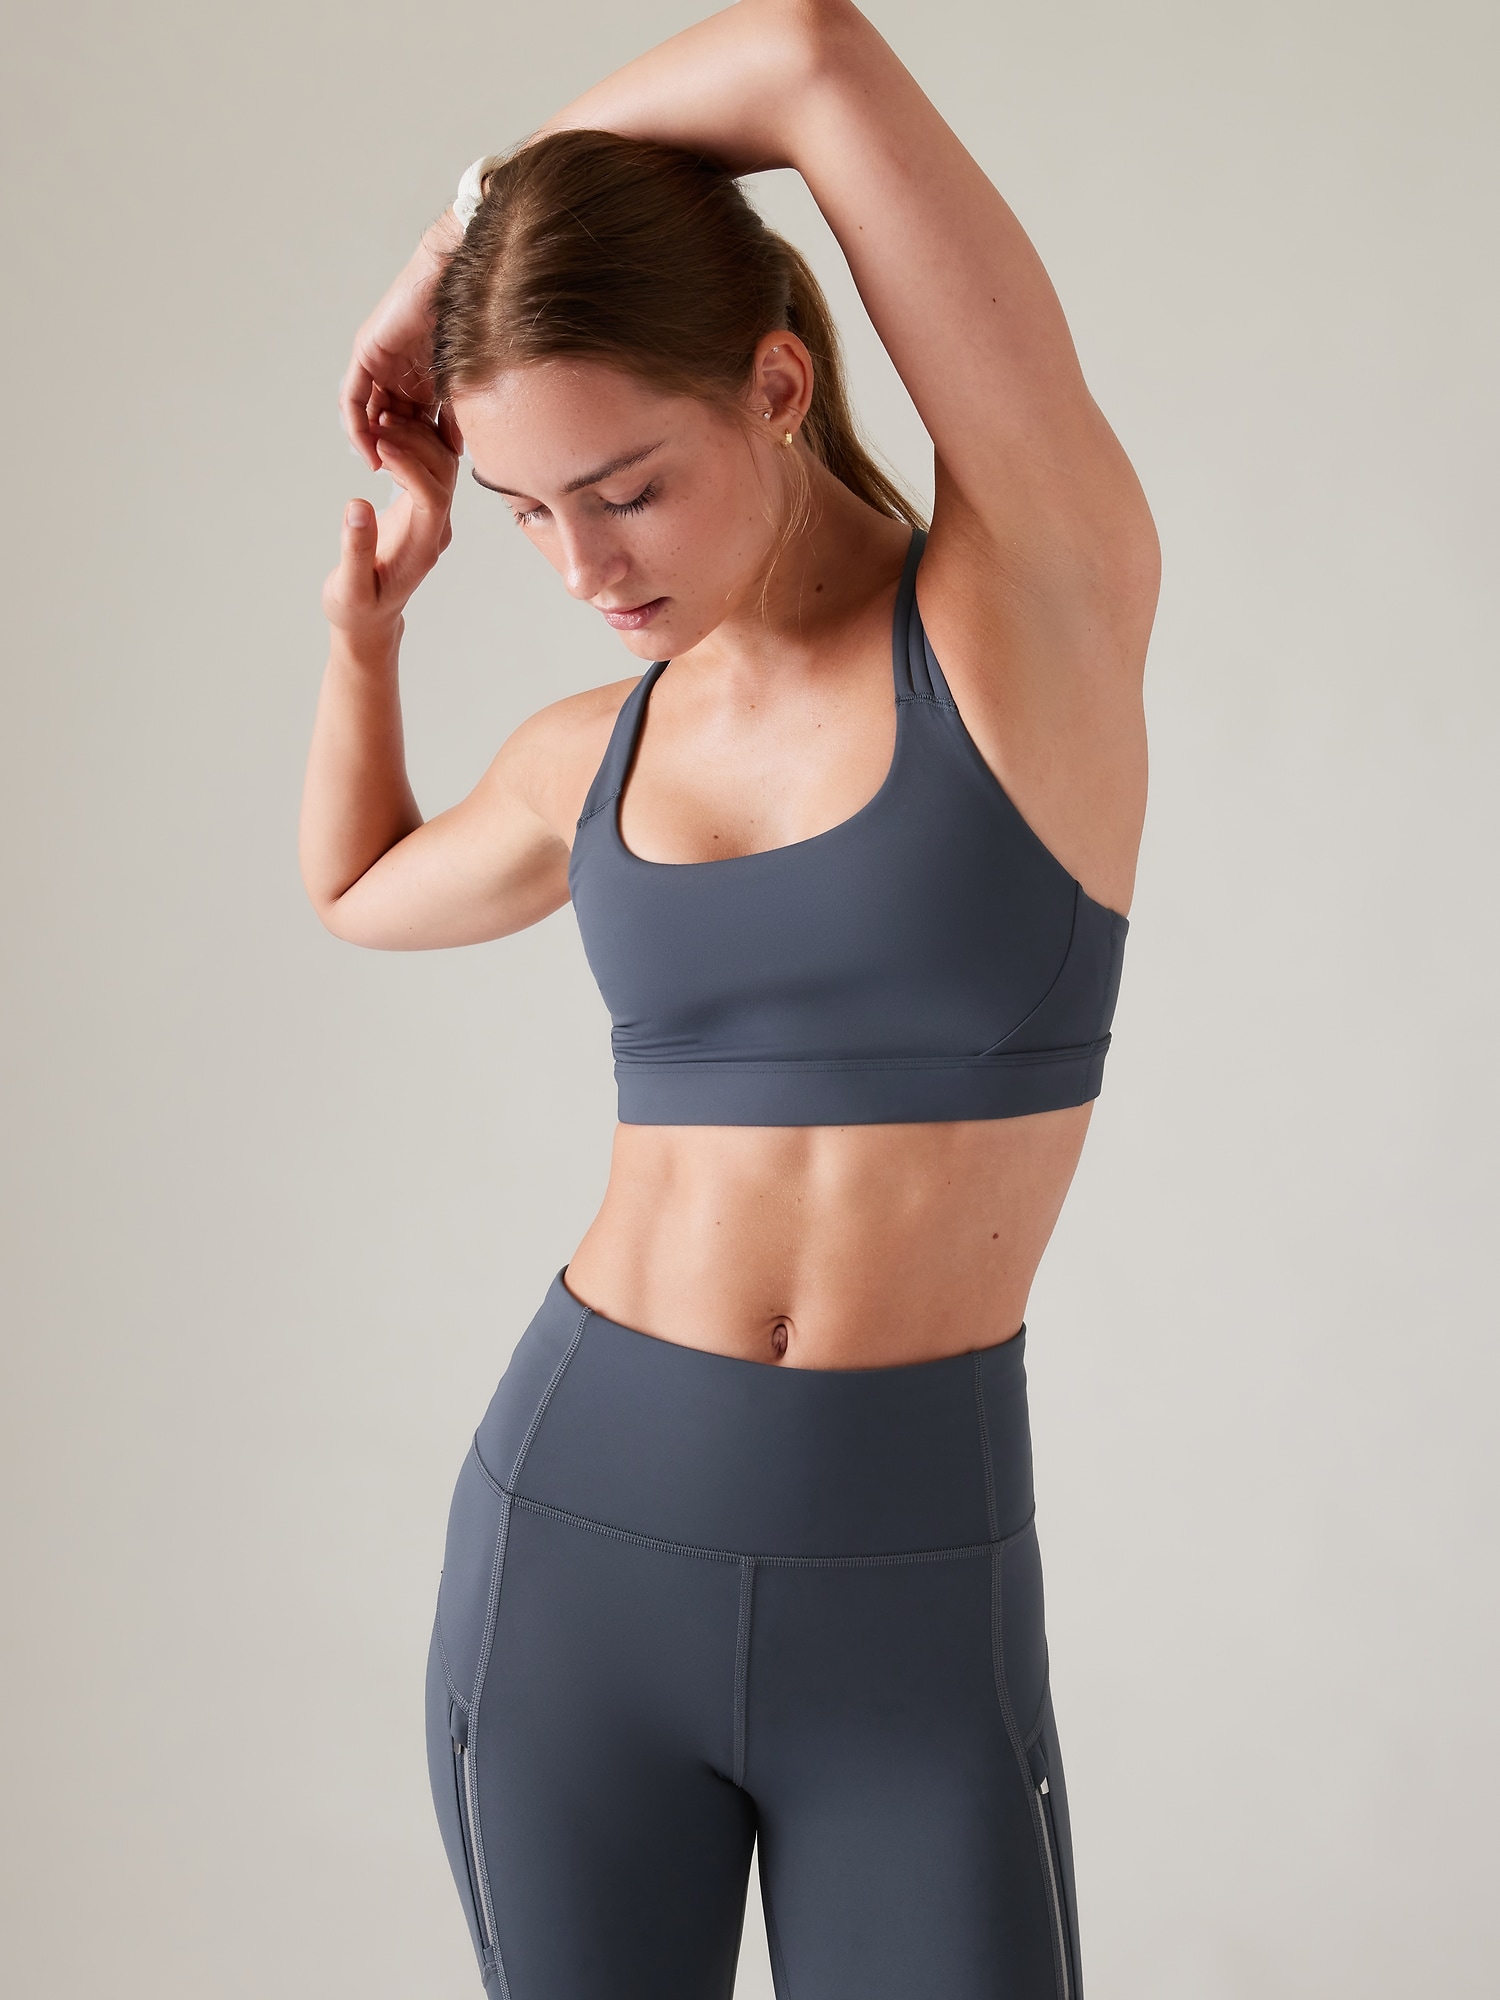 Surprise! Free To Be Wild Bras Are Back in 3 New Colors! - Agent Athletica